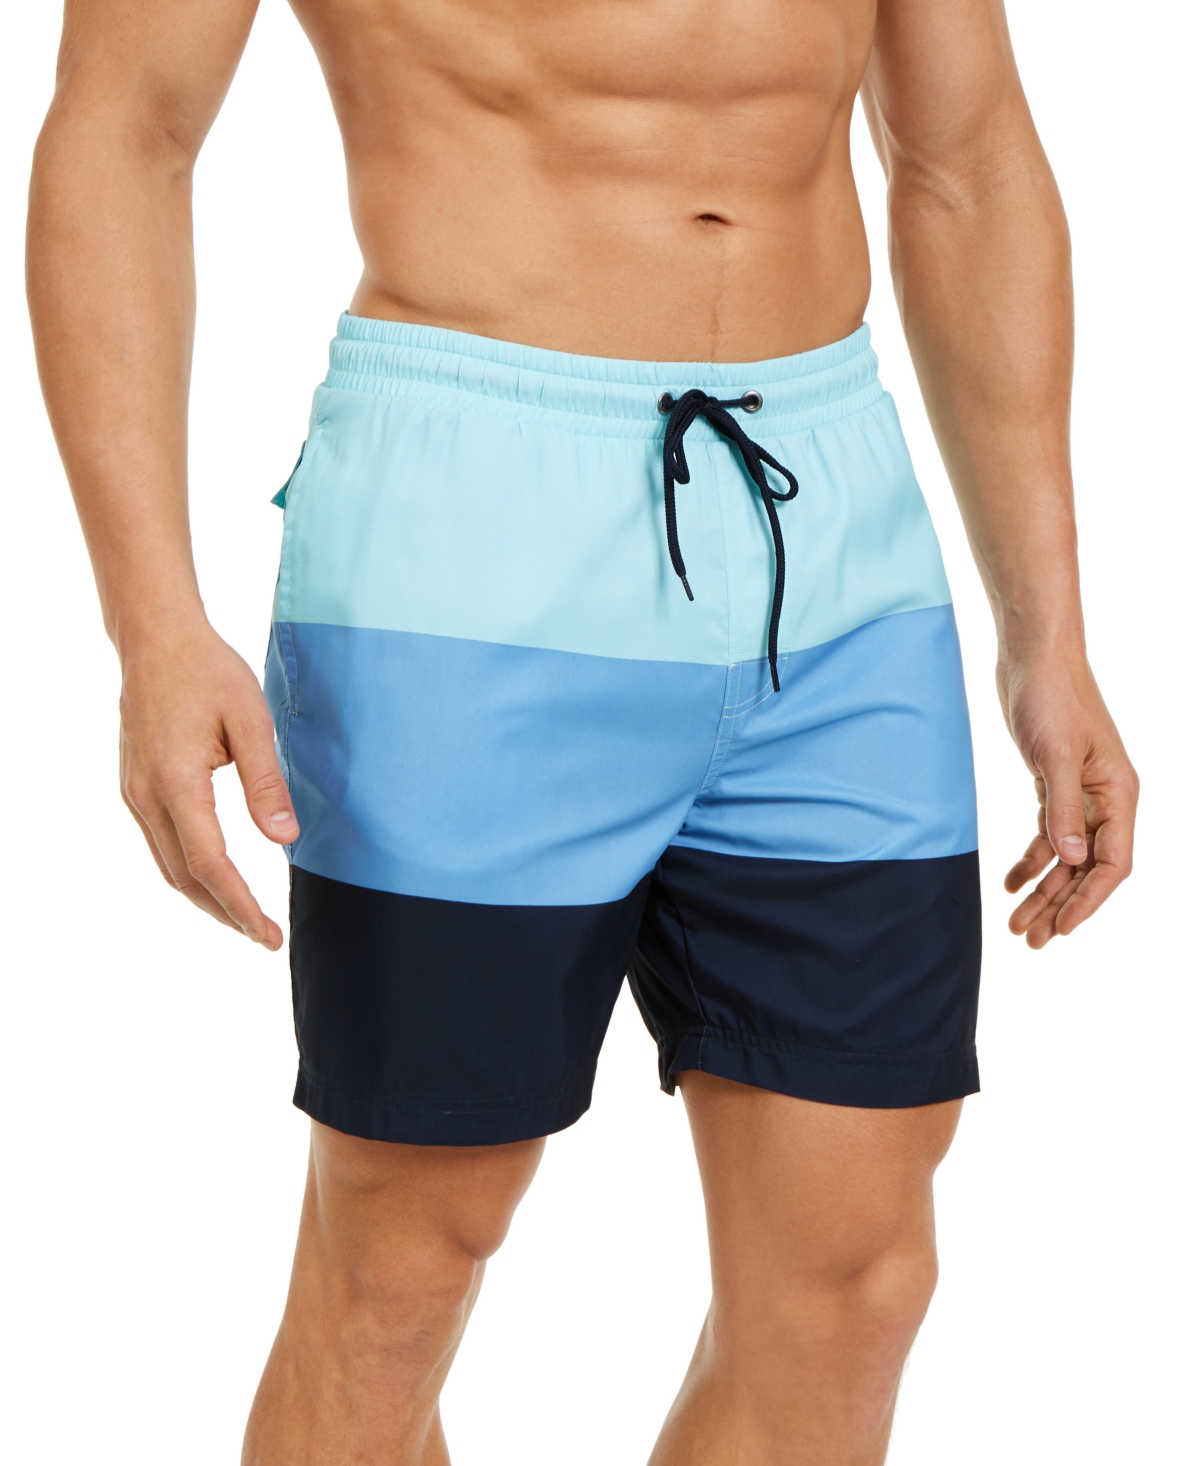 Men's Colorblocked 7" Swim Trunks, Created for Macy's - Pink Combo